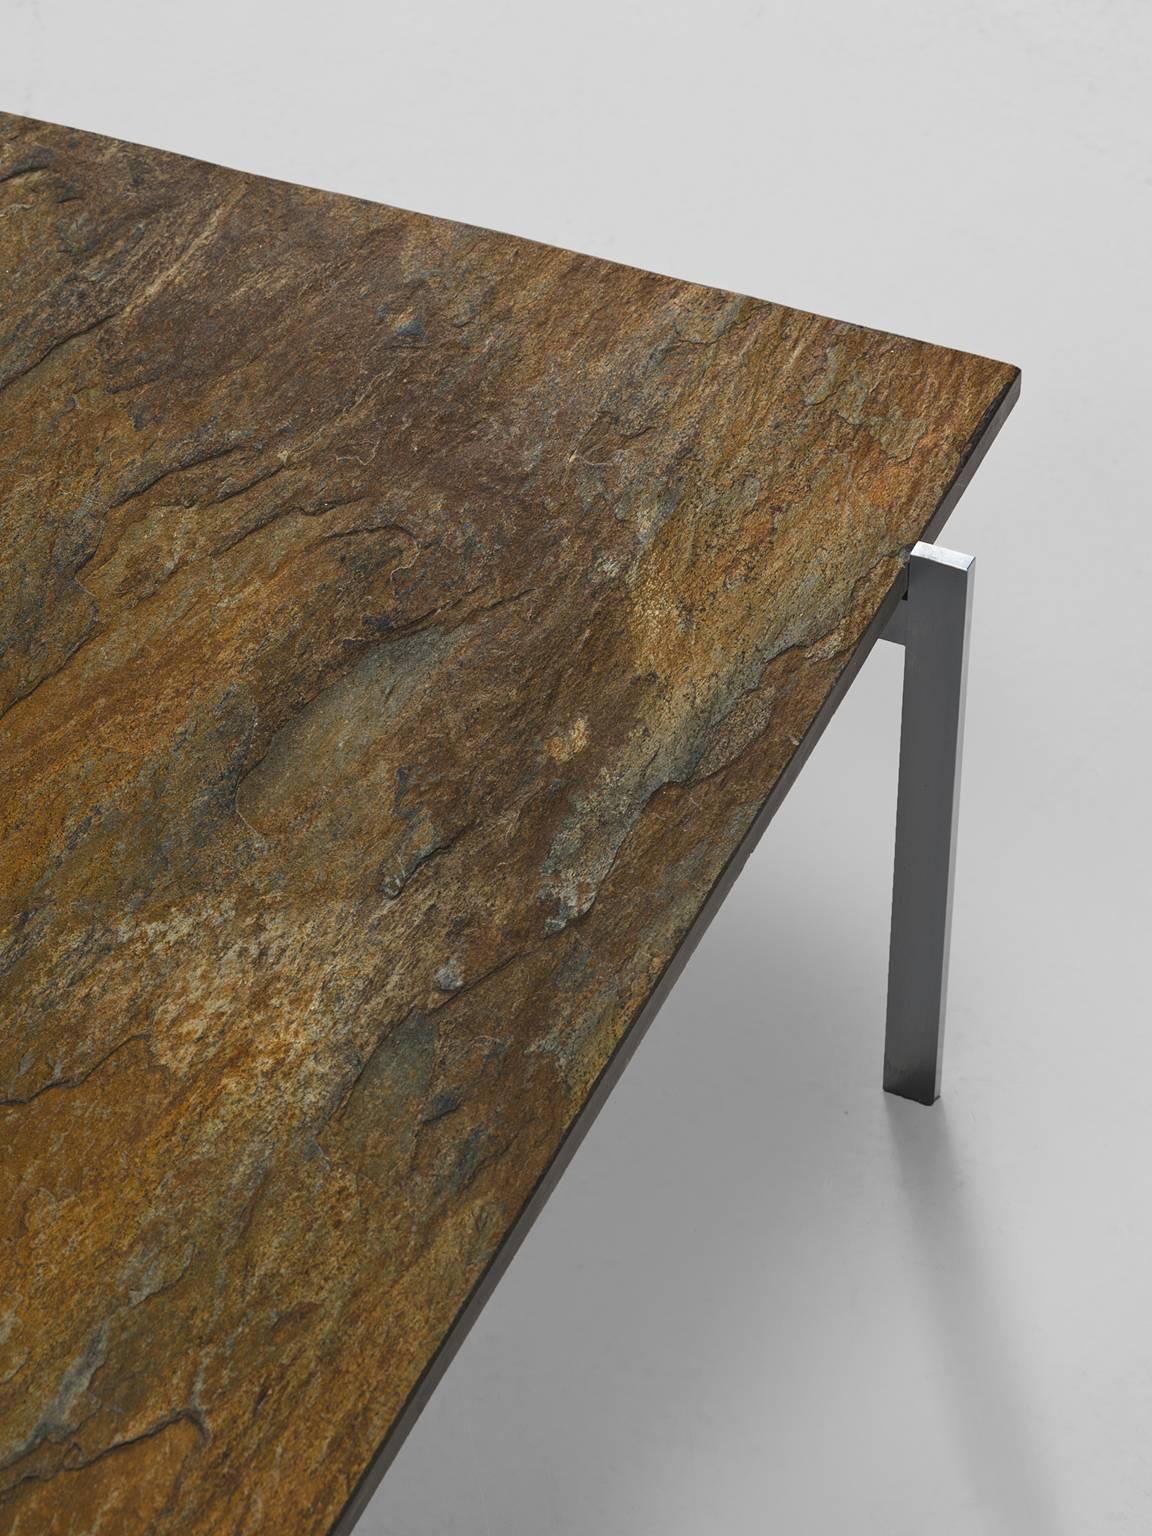 Metal Poul Kjærholm PK61 Coffee Table in Patinated Ocre Slate